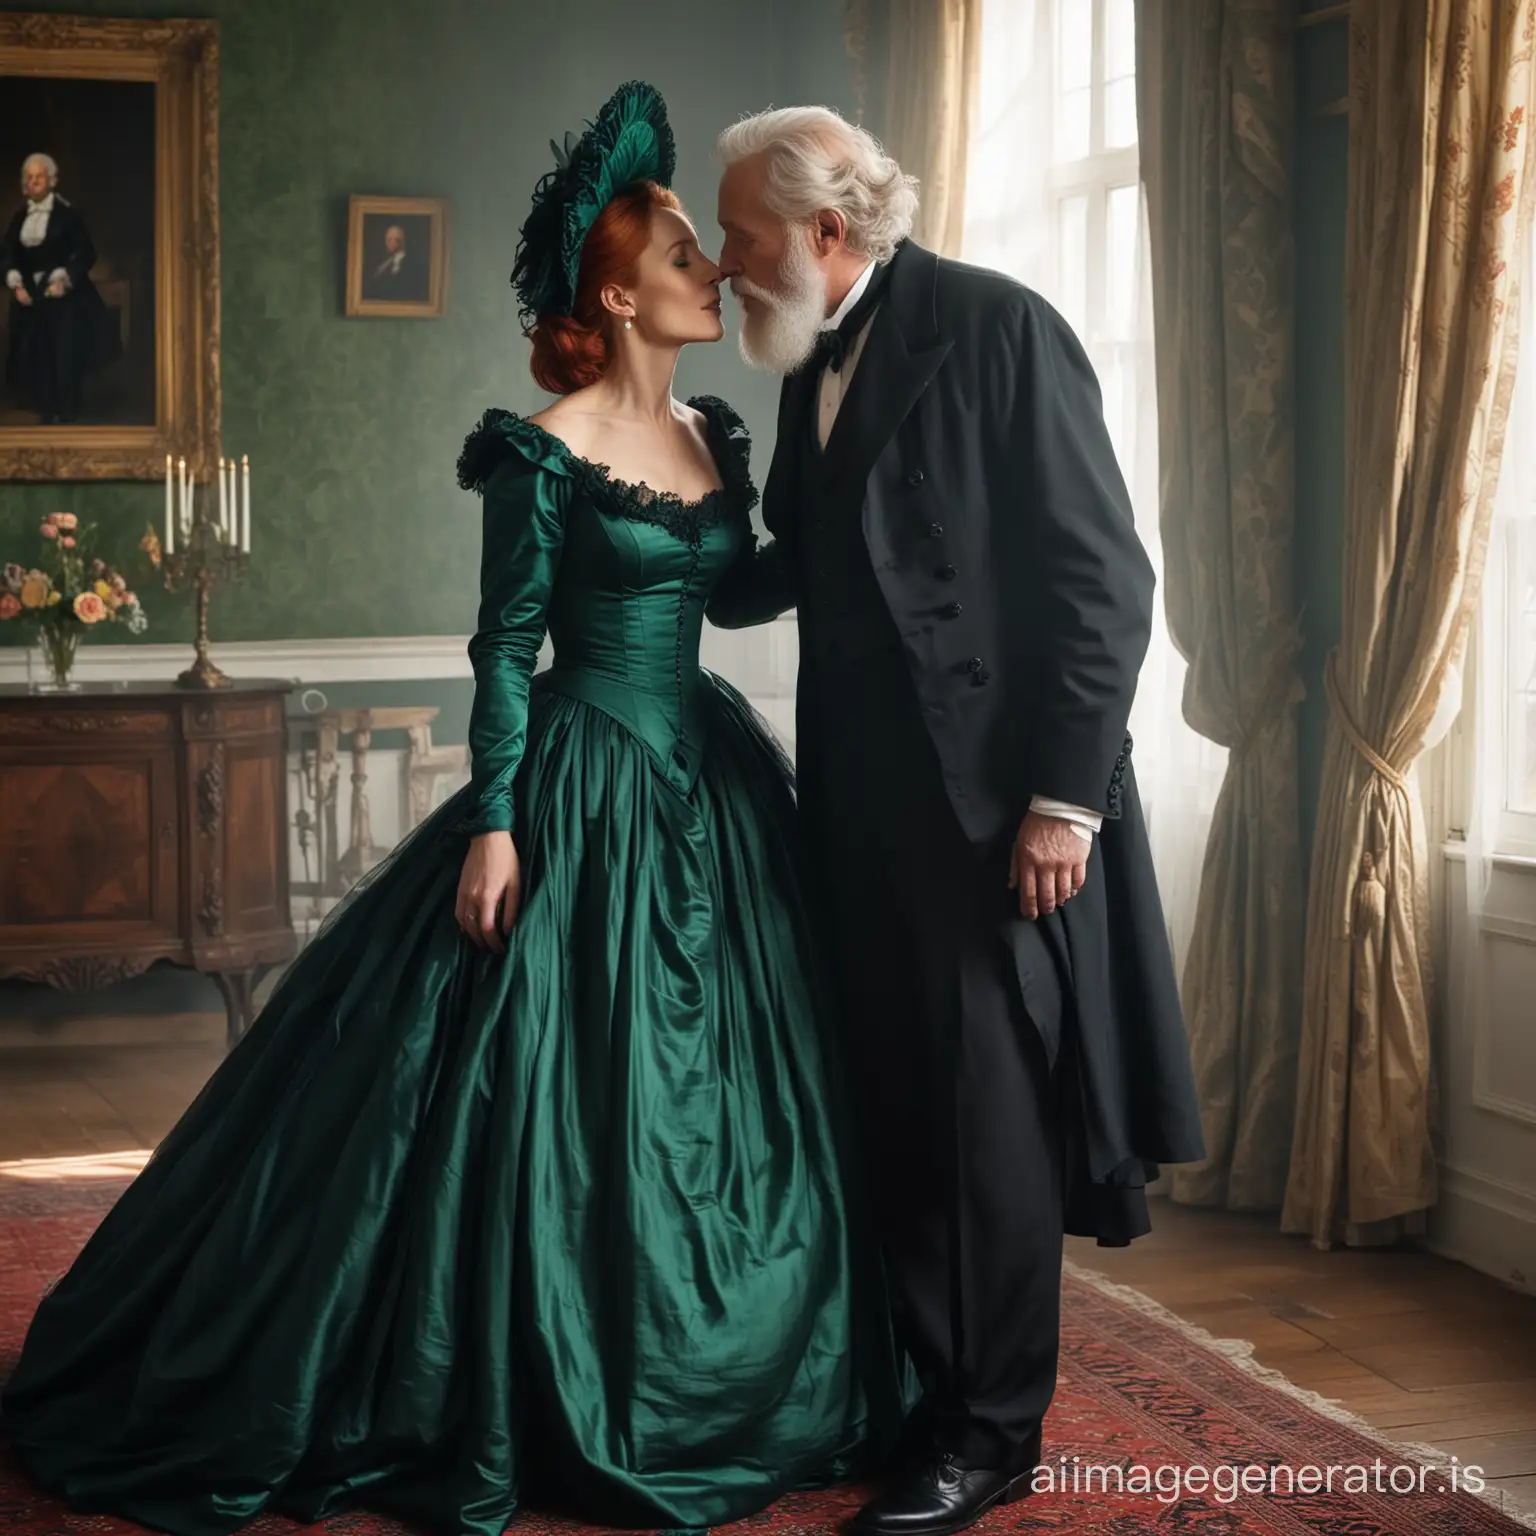 red hair Gillian Anderson wearing a poofy dark emerald floor-length loose billowing 1860 victorian crinoline dress with  a frilly bonnet kissing an old man who seems to be her newlywed husband
